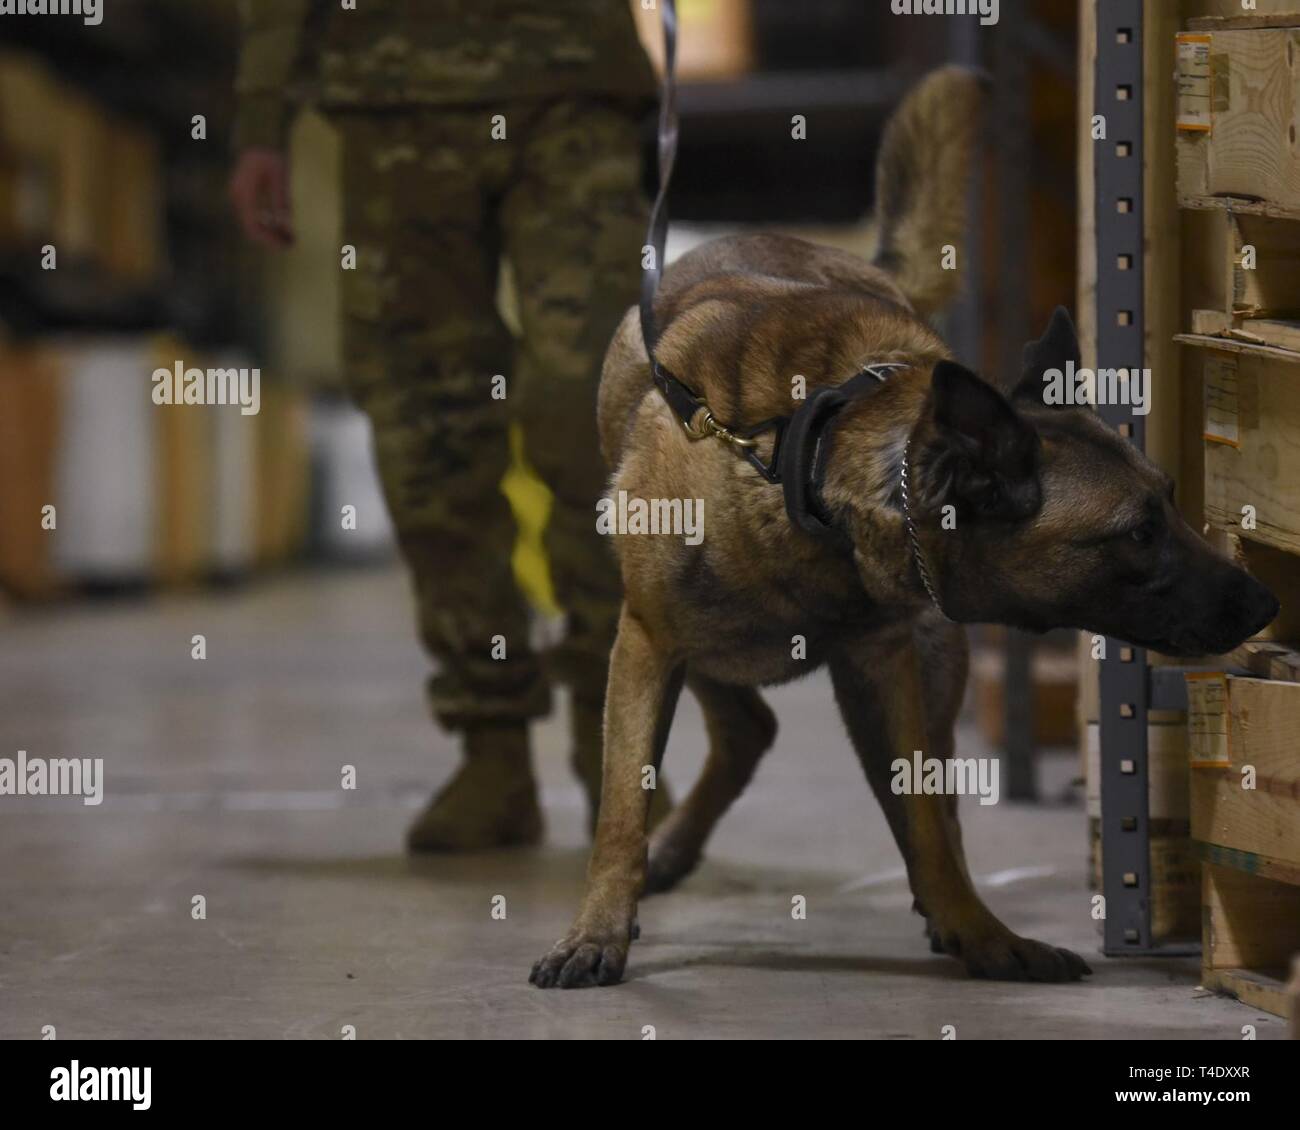 A military working dog sniffs a crate at Joint Base Langley-Eustis, Virginia, March 22, 2019. Service members from the U.S. Army, the U.S. Air Force and the U.S. Navy took part in the specialized peroxide scents training conducted by Federal Bureau of Investigation special agents. Stock Photo